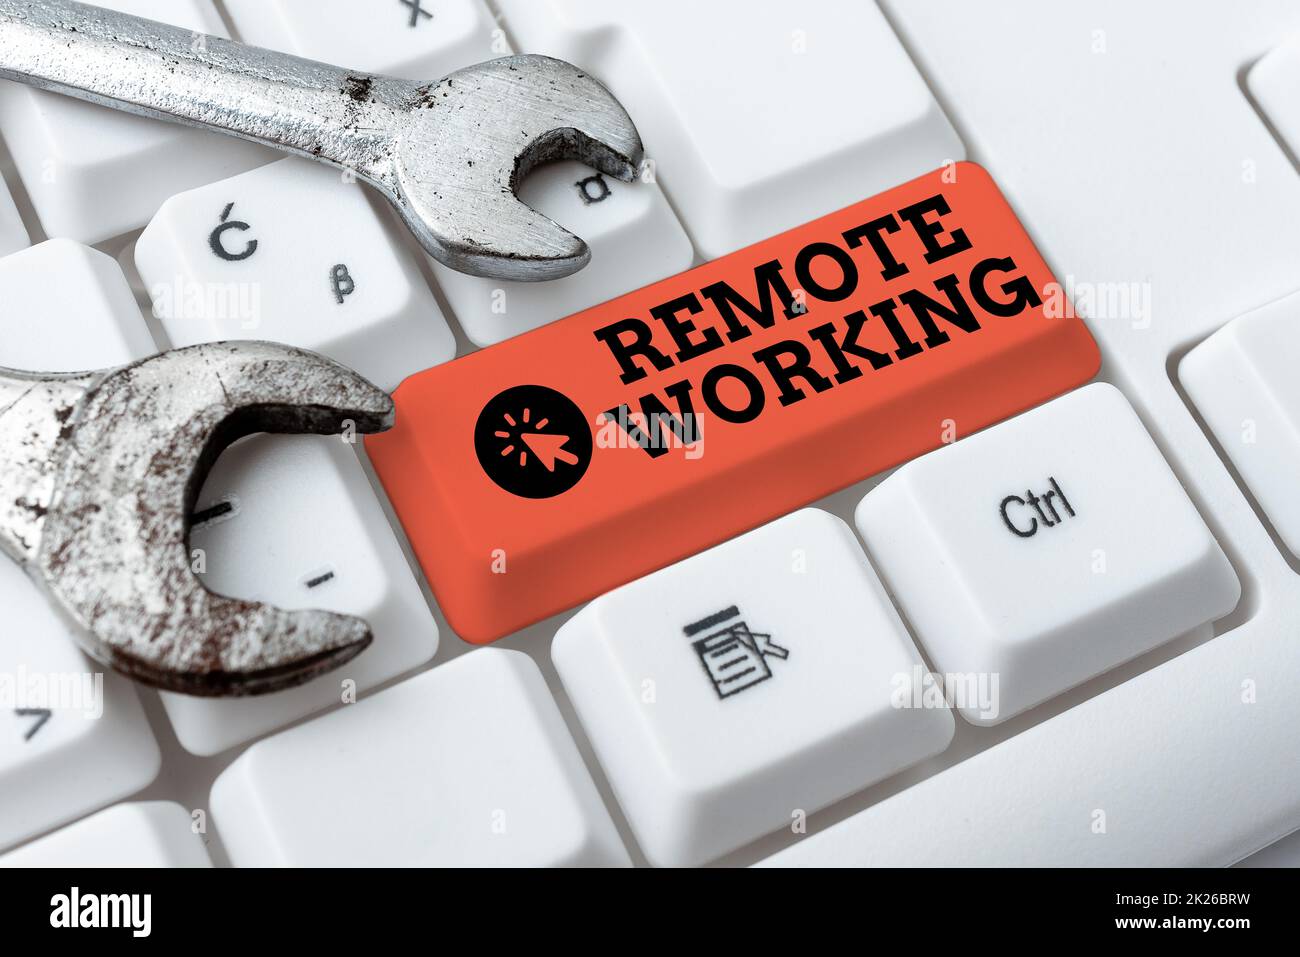 Inspiration showing sign Remote Working. Business concept style that allows professionals to work outside of an office Connecting With Online Friends, Making Acquaintances On The Internet Stock Photo